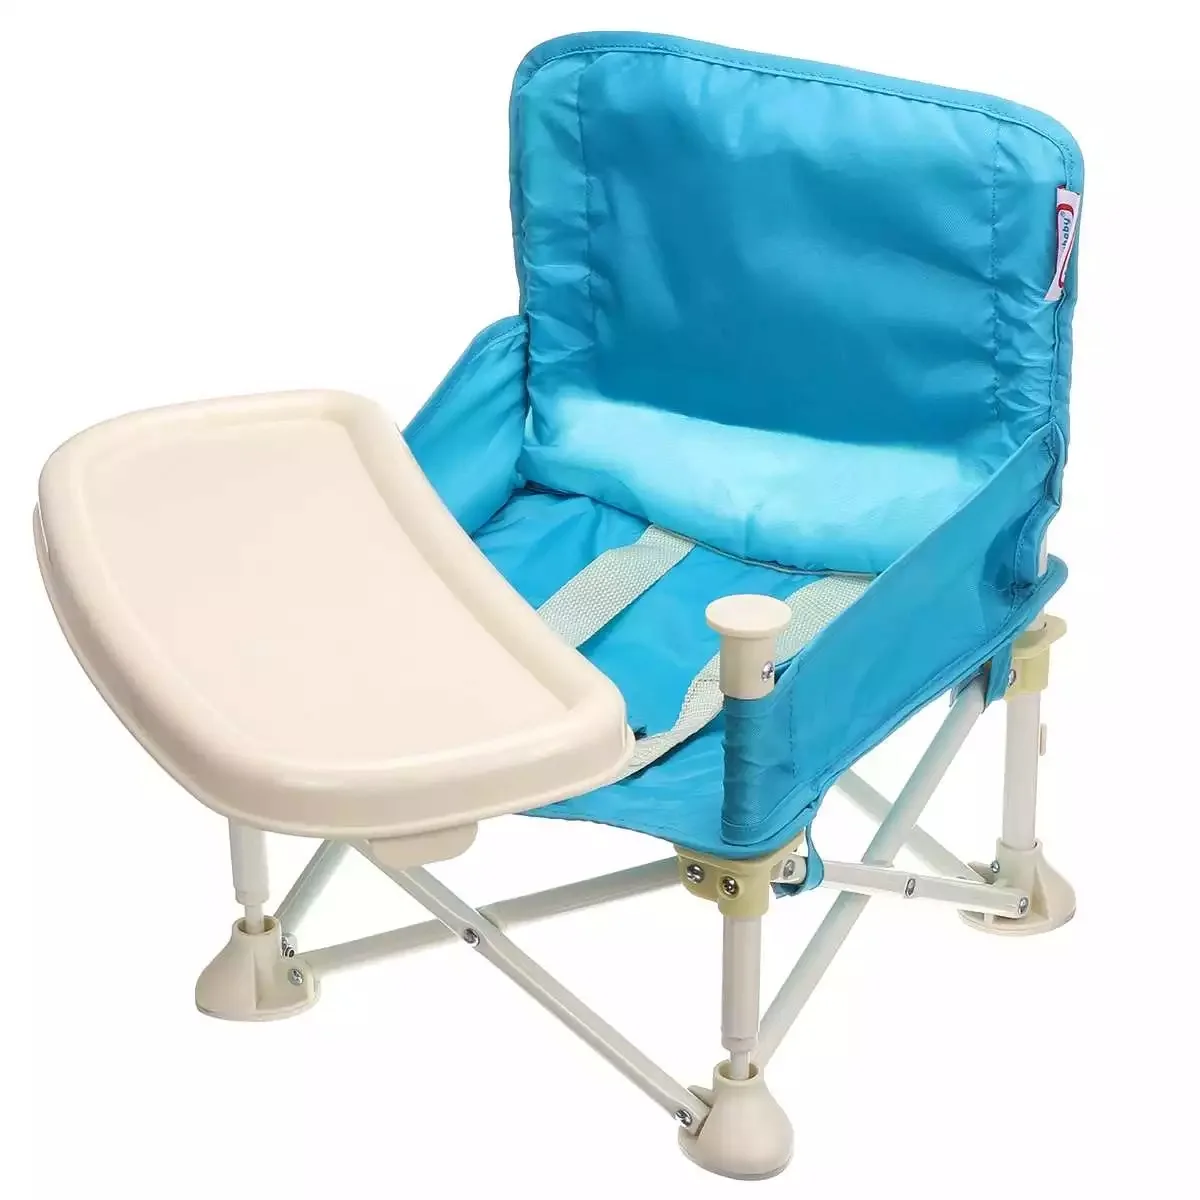 Portable Booster Seat Travel Booster Feeding Seat Folding High Chair for Home & Travel Toddler Booster Chair